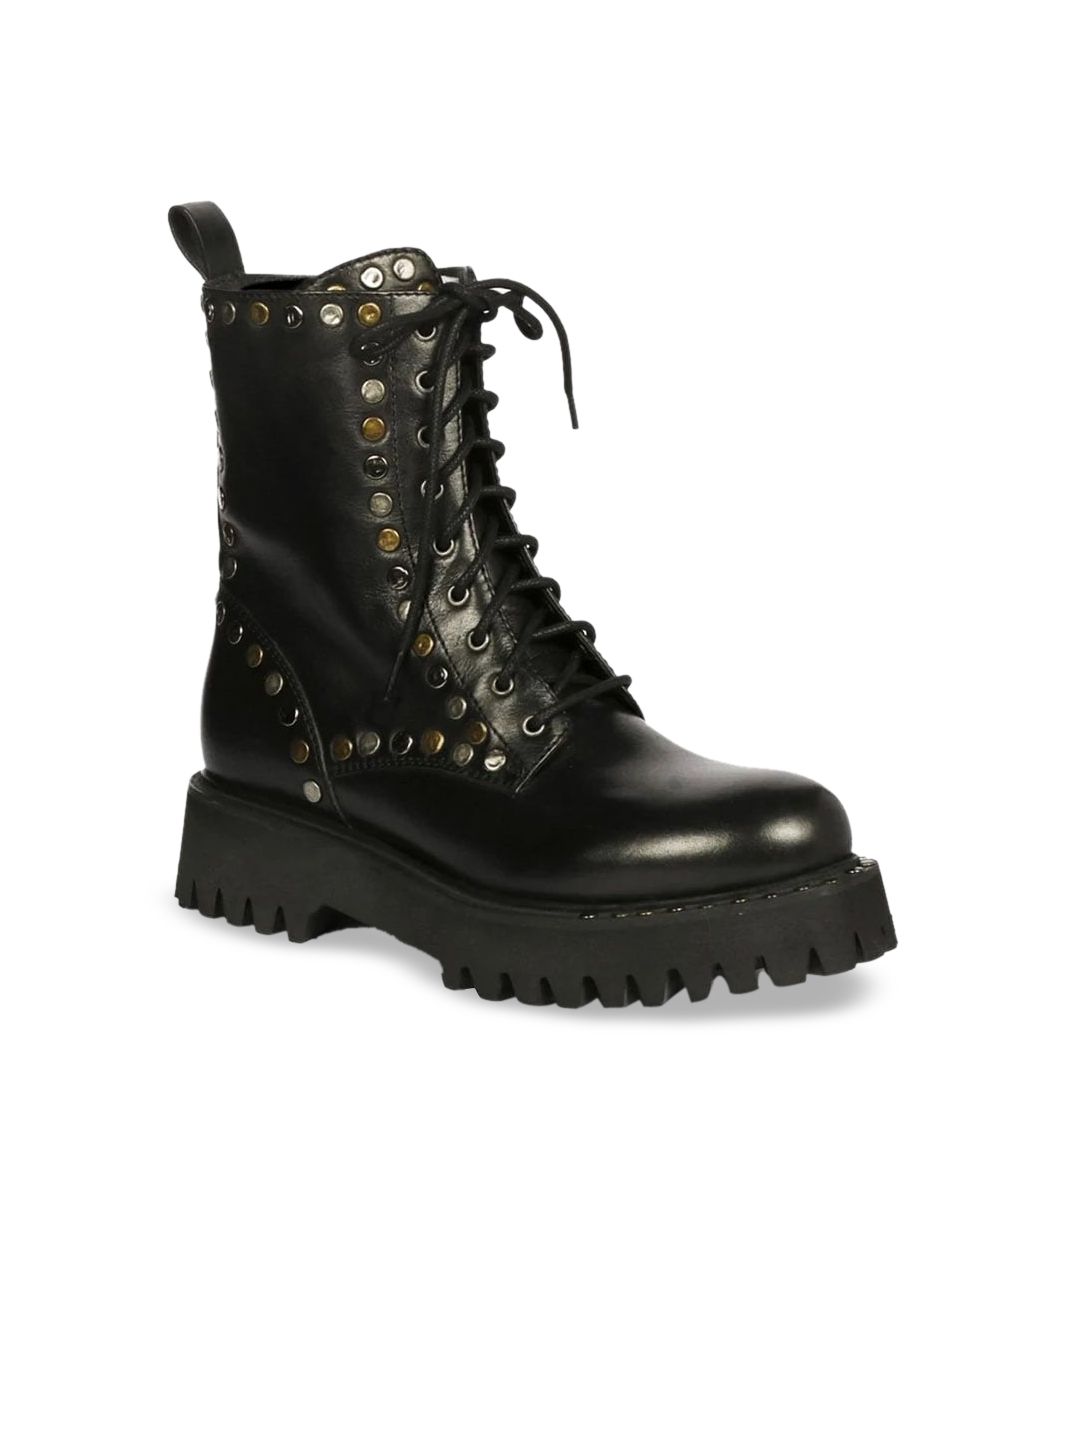 Saint G Black Metal Studs Lace Up High Ankle Leather Boots Price in India